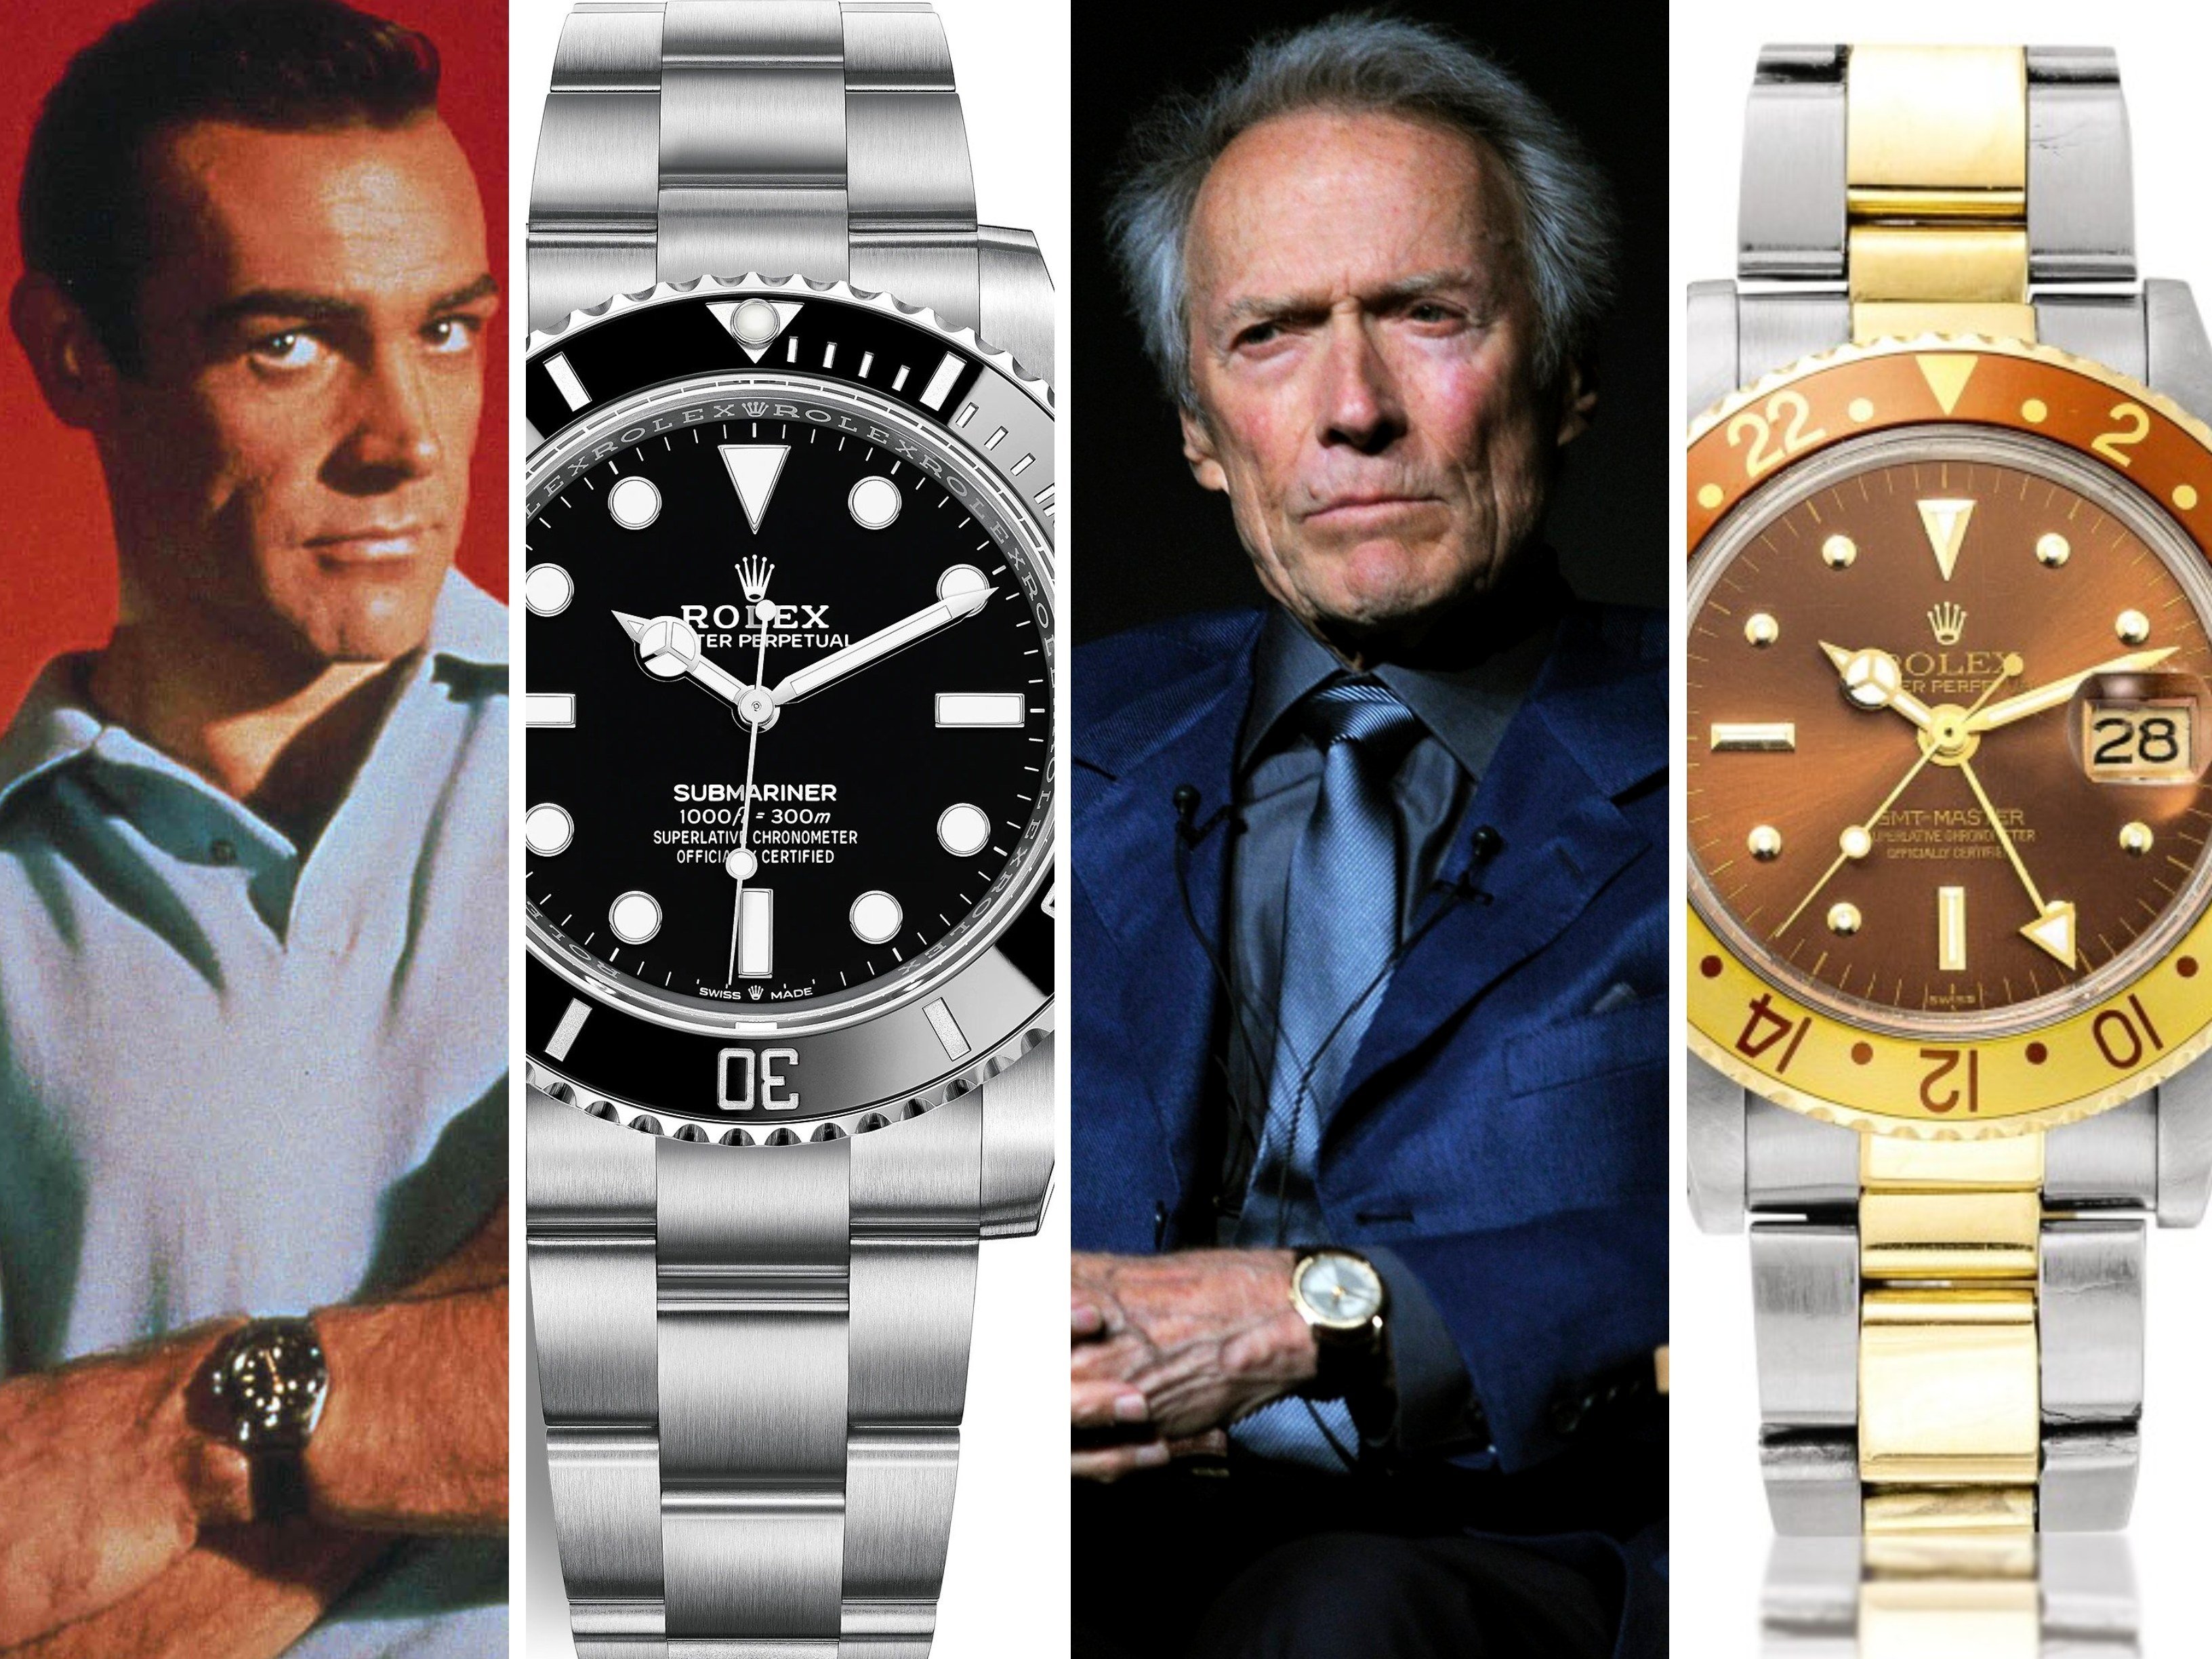 Sean Connery’s James Bond character and Clint Eastwood have Rolex watches named after them. Photos: United Artists, Rolex, EPA, Sotheby’s